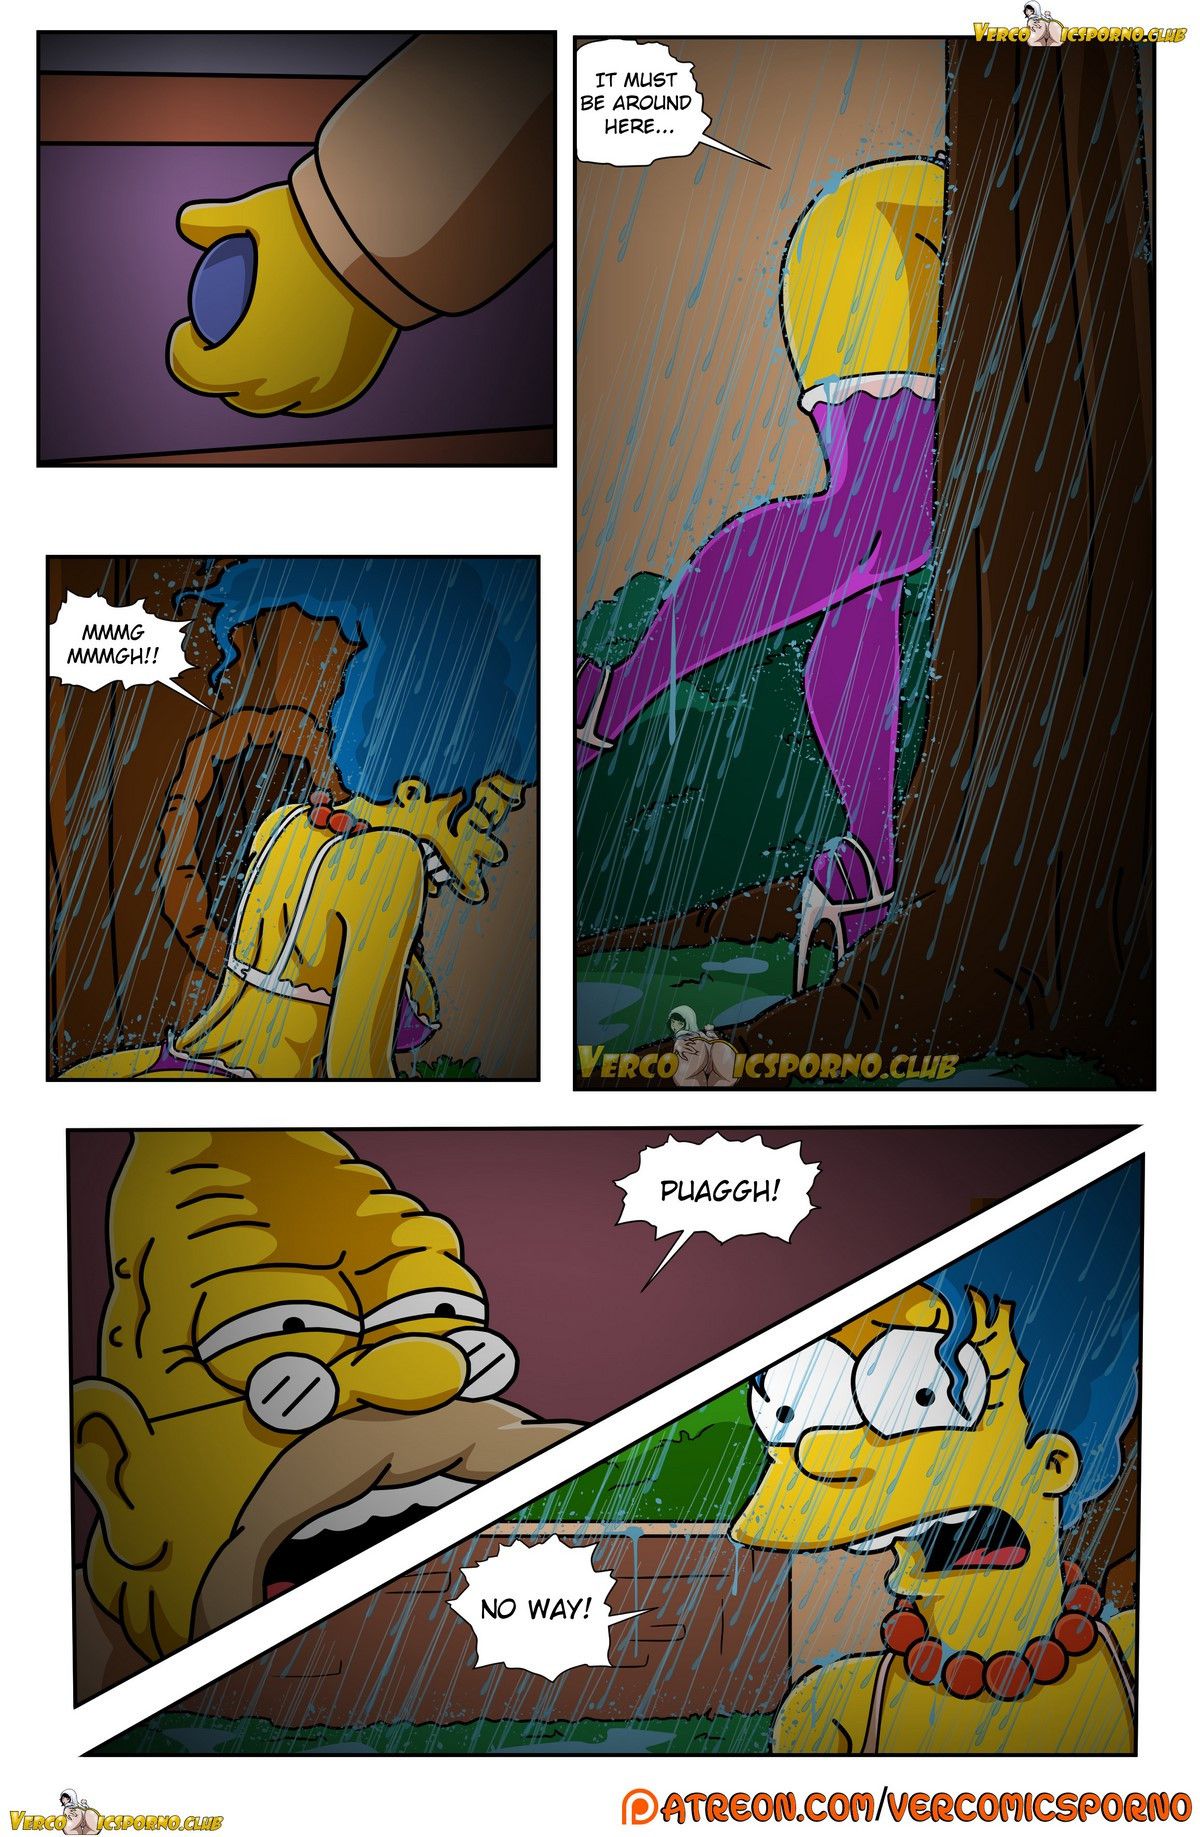 Grandpa and me - [Itooneaxxx] - [Drah Navlag] - [VCP] - [The Simpsons] 25